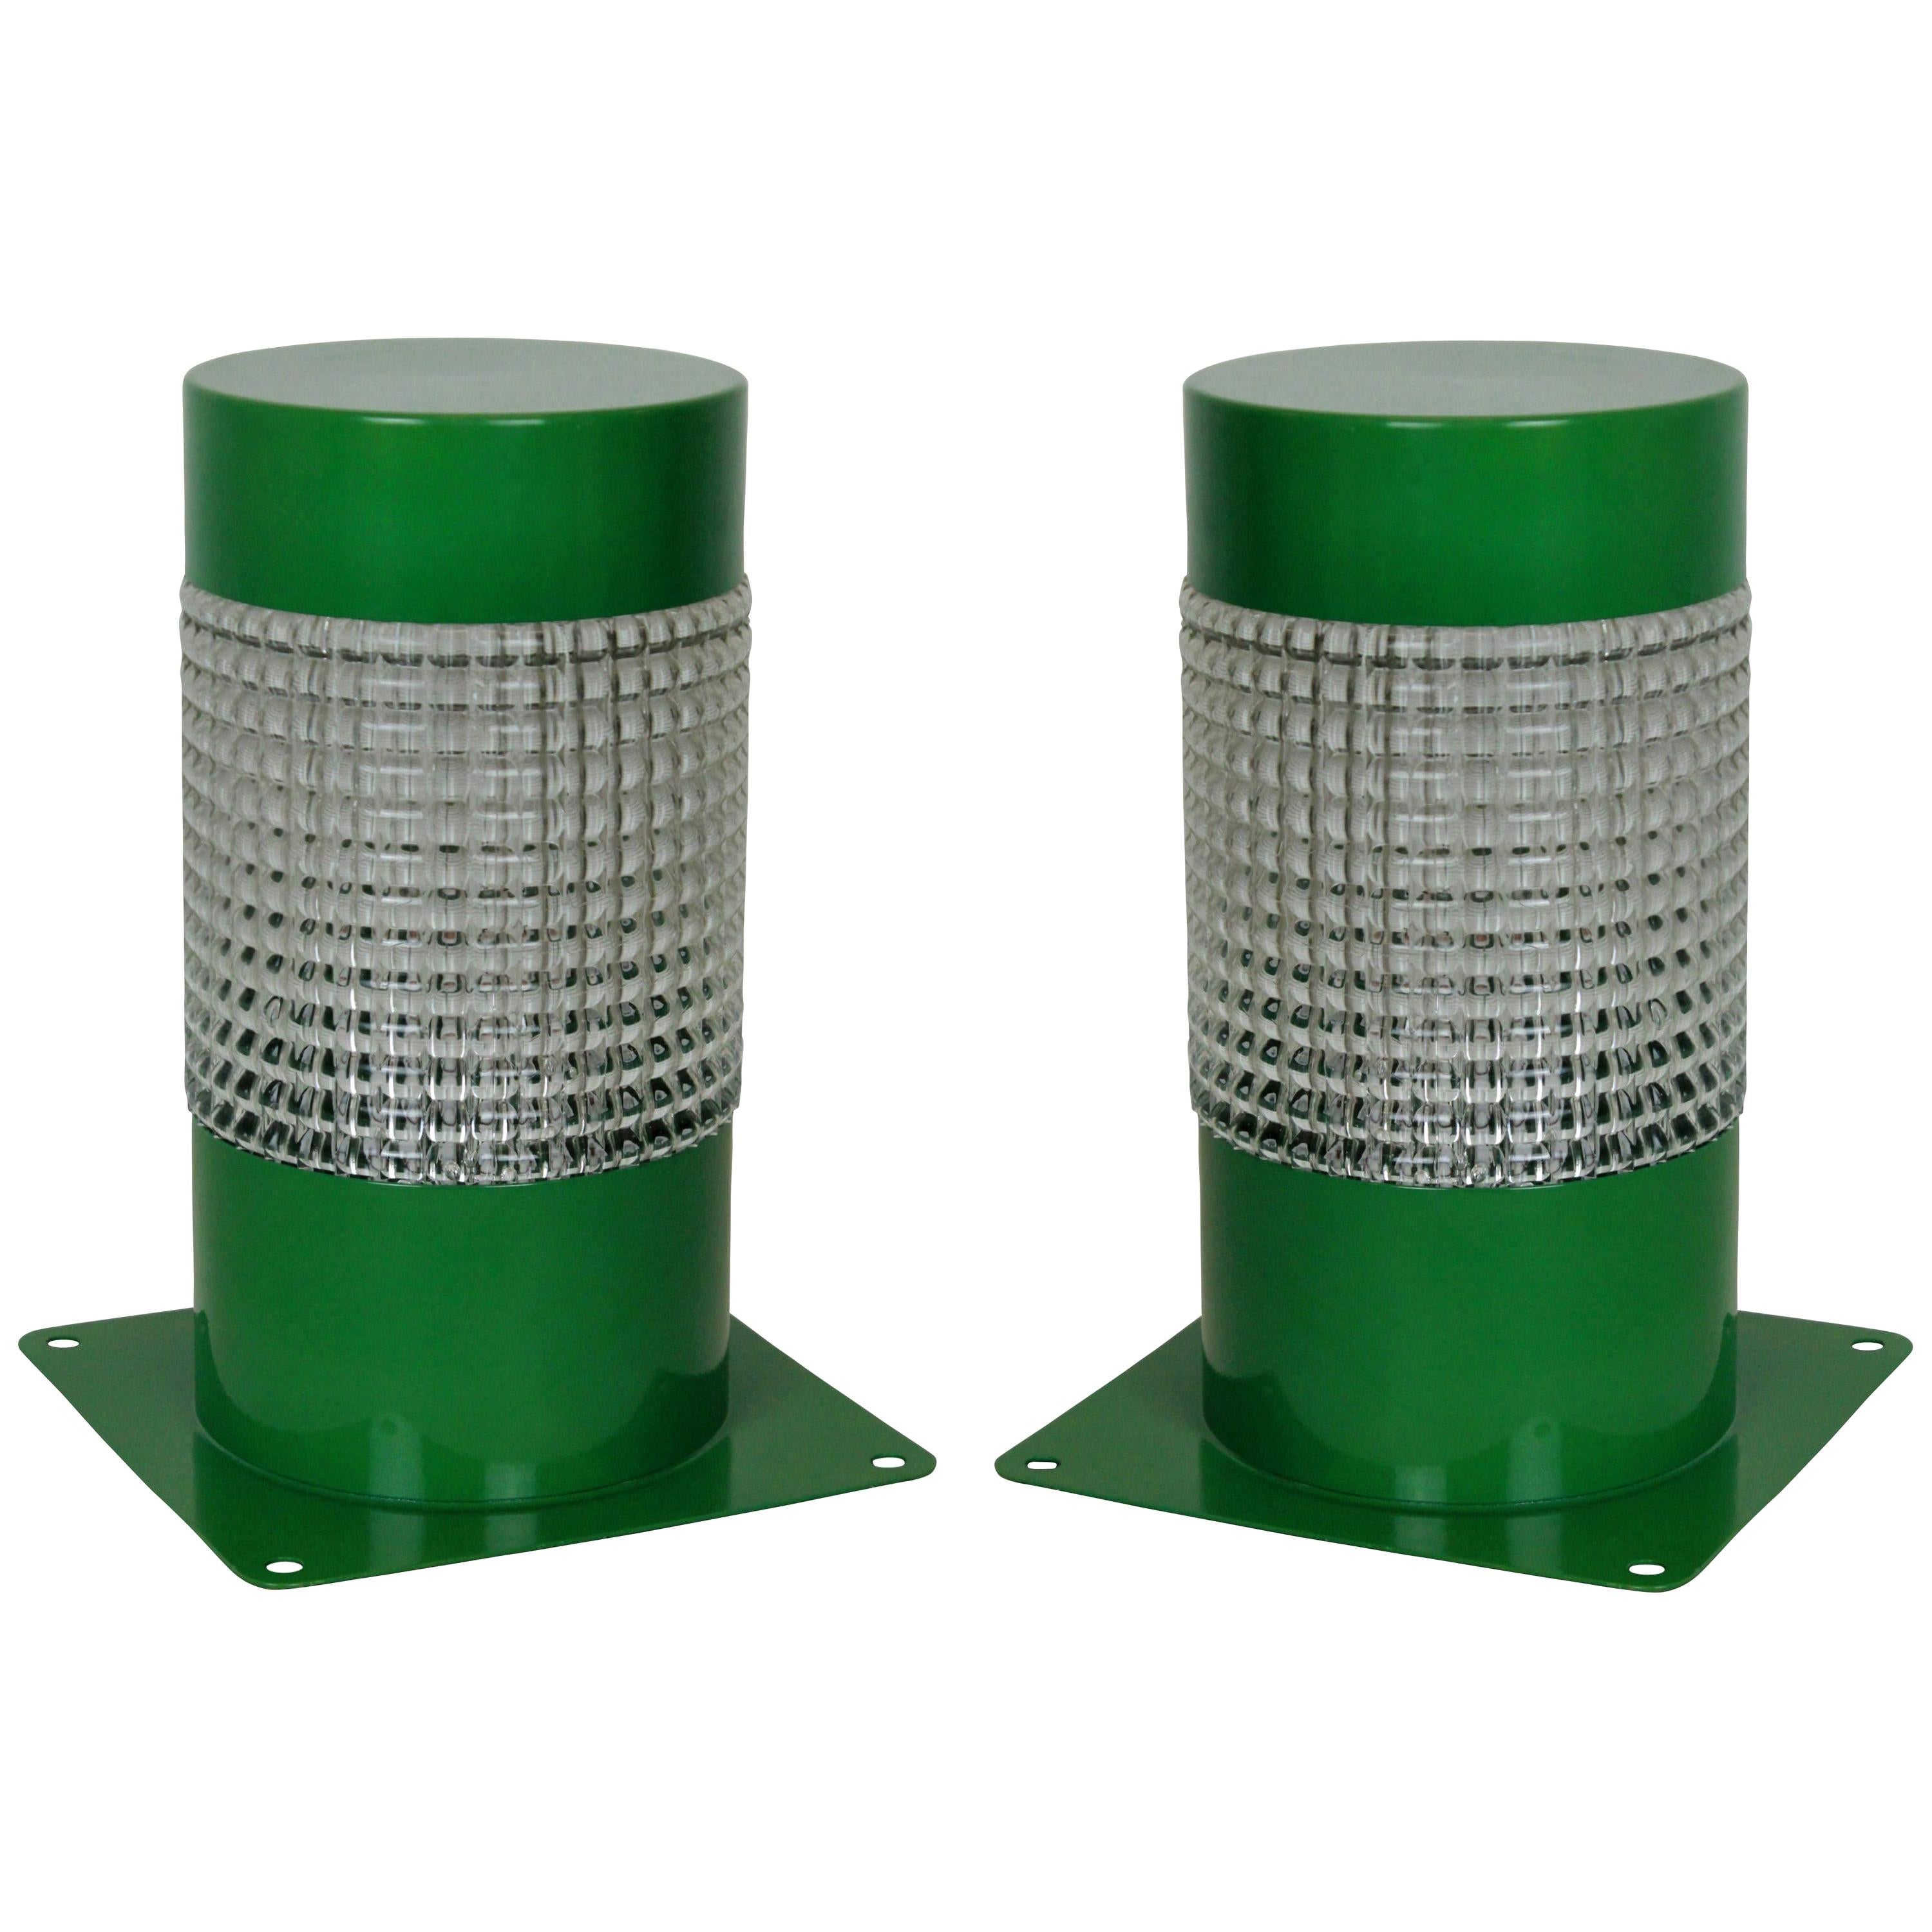 Pair of 1960s Lights in Emerald Green Lacquer